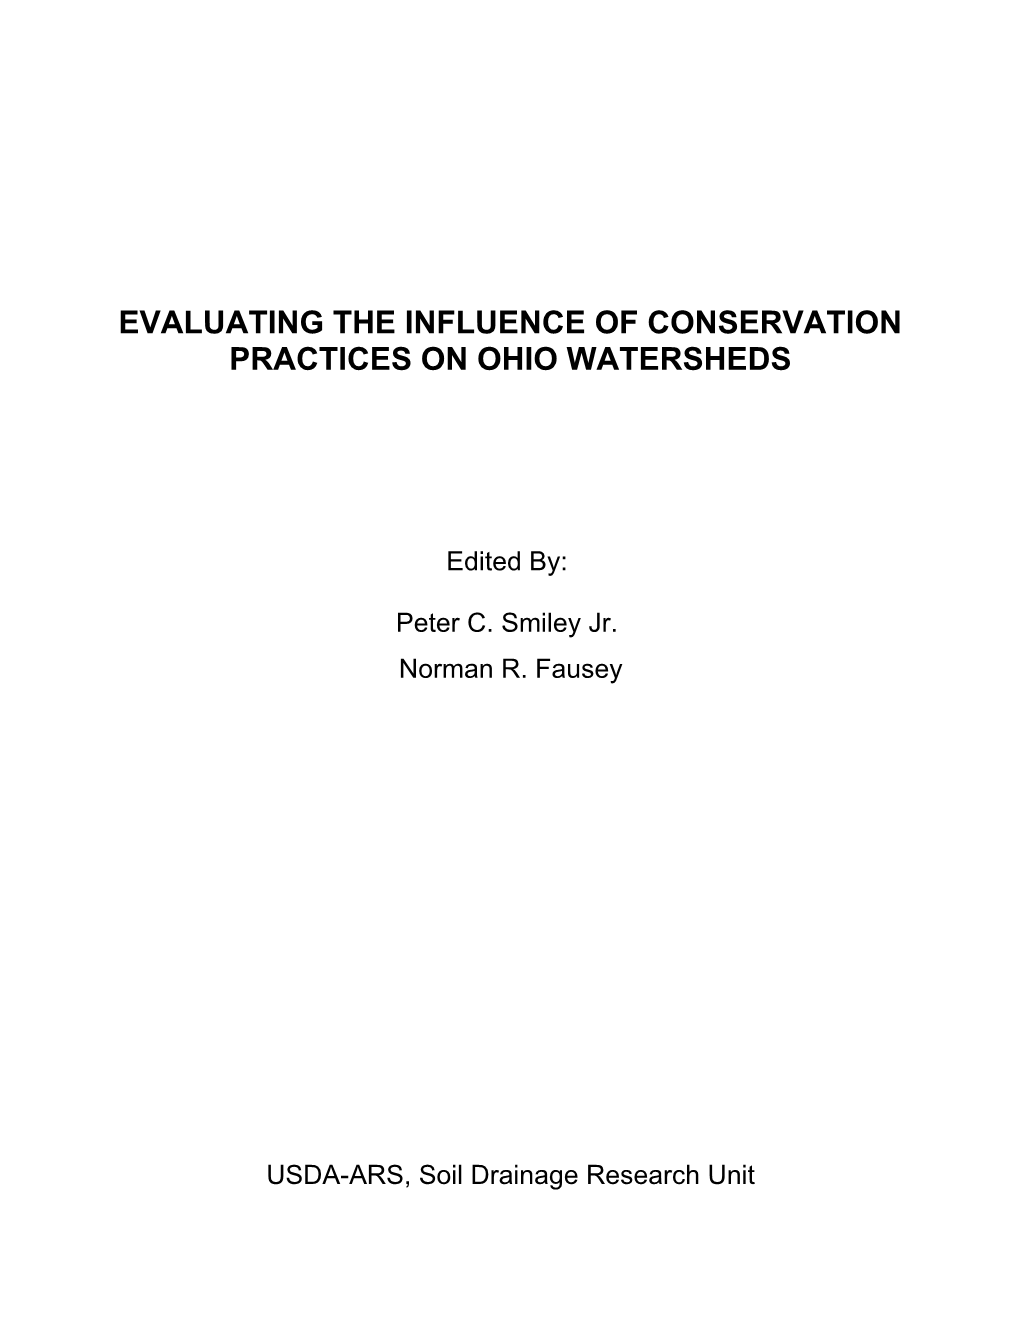 Symposium Title: Evaluating the Influence of Conservation Practices on Ohio Watersheds